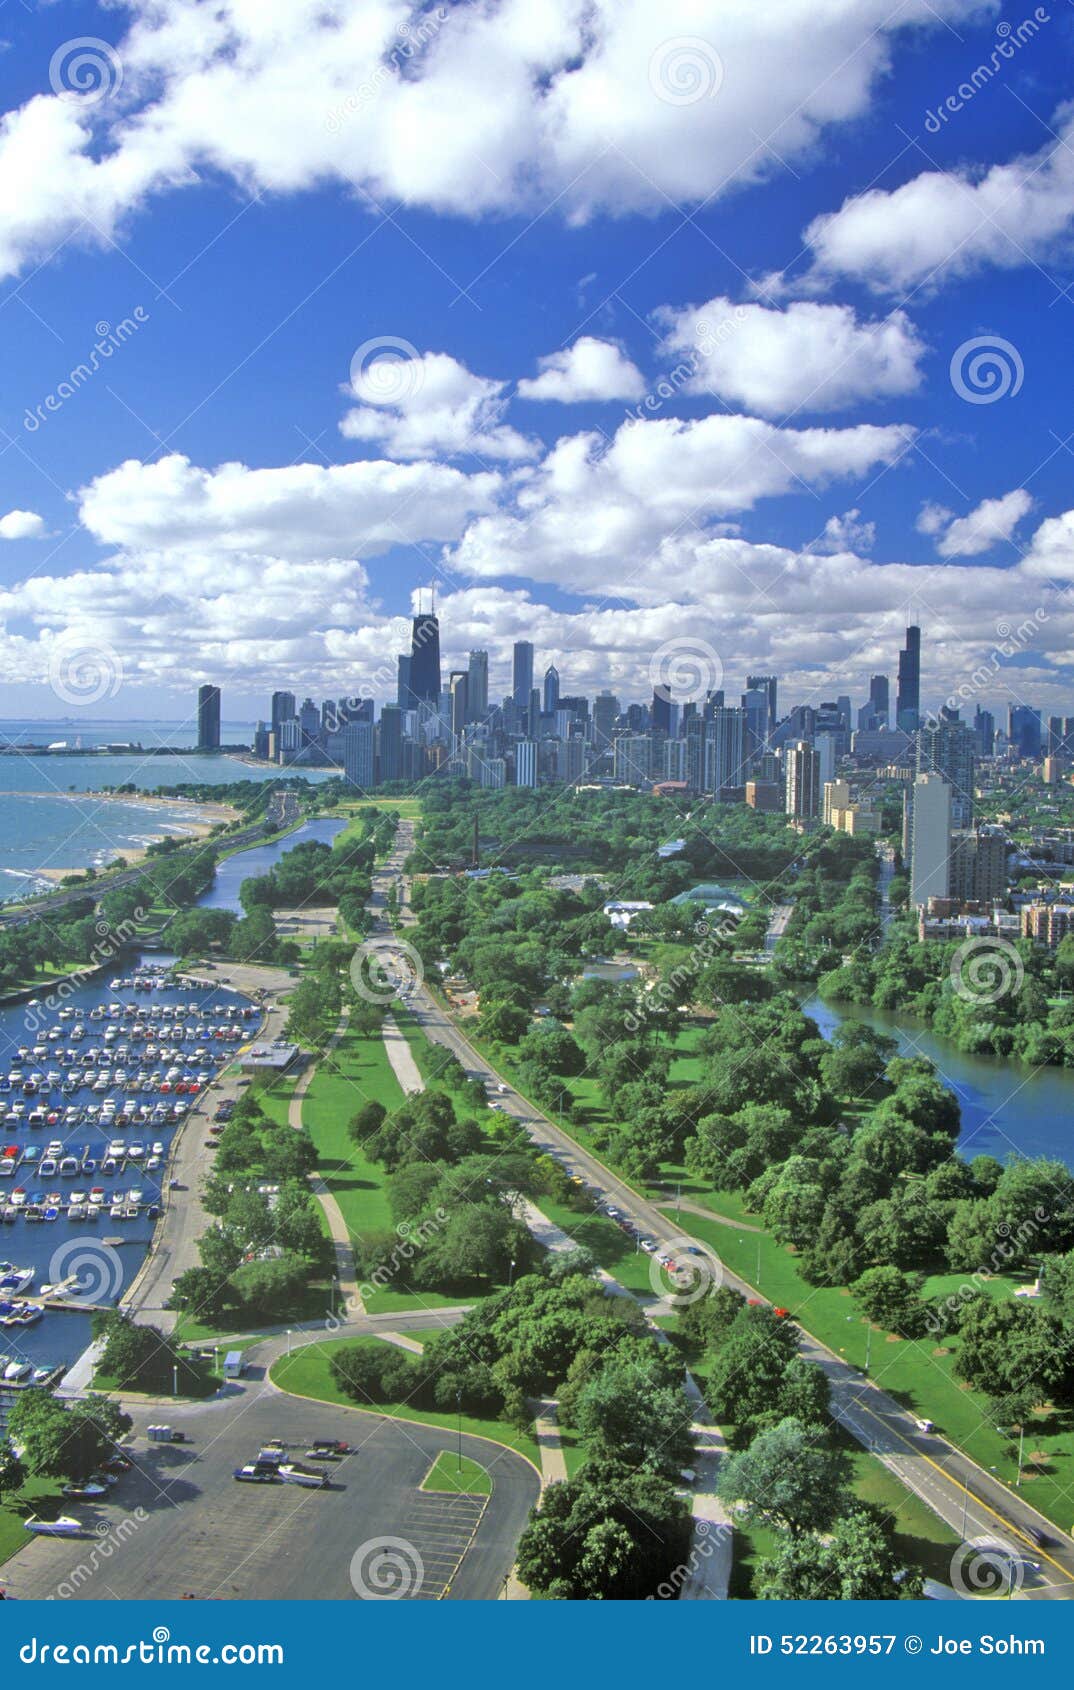 aerial view of chicago, illinois